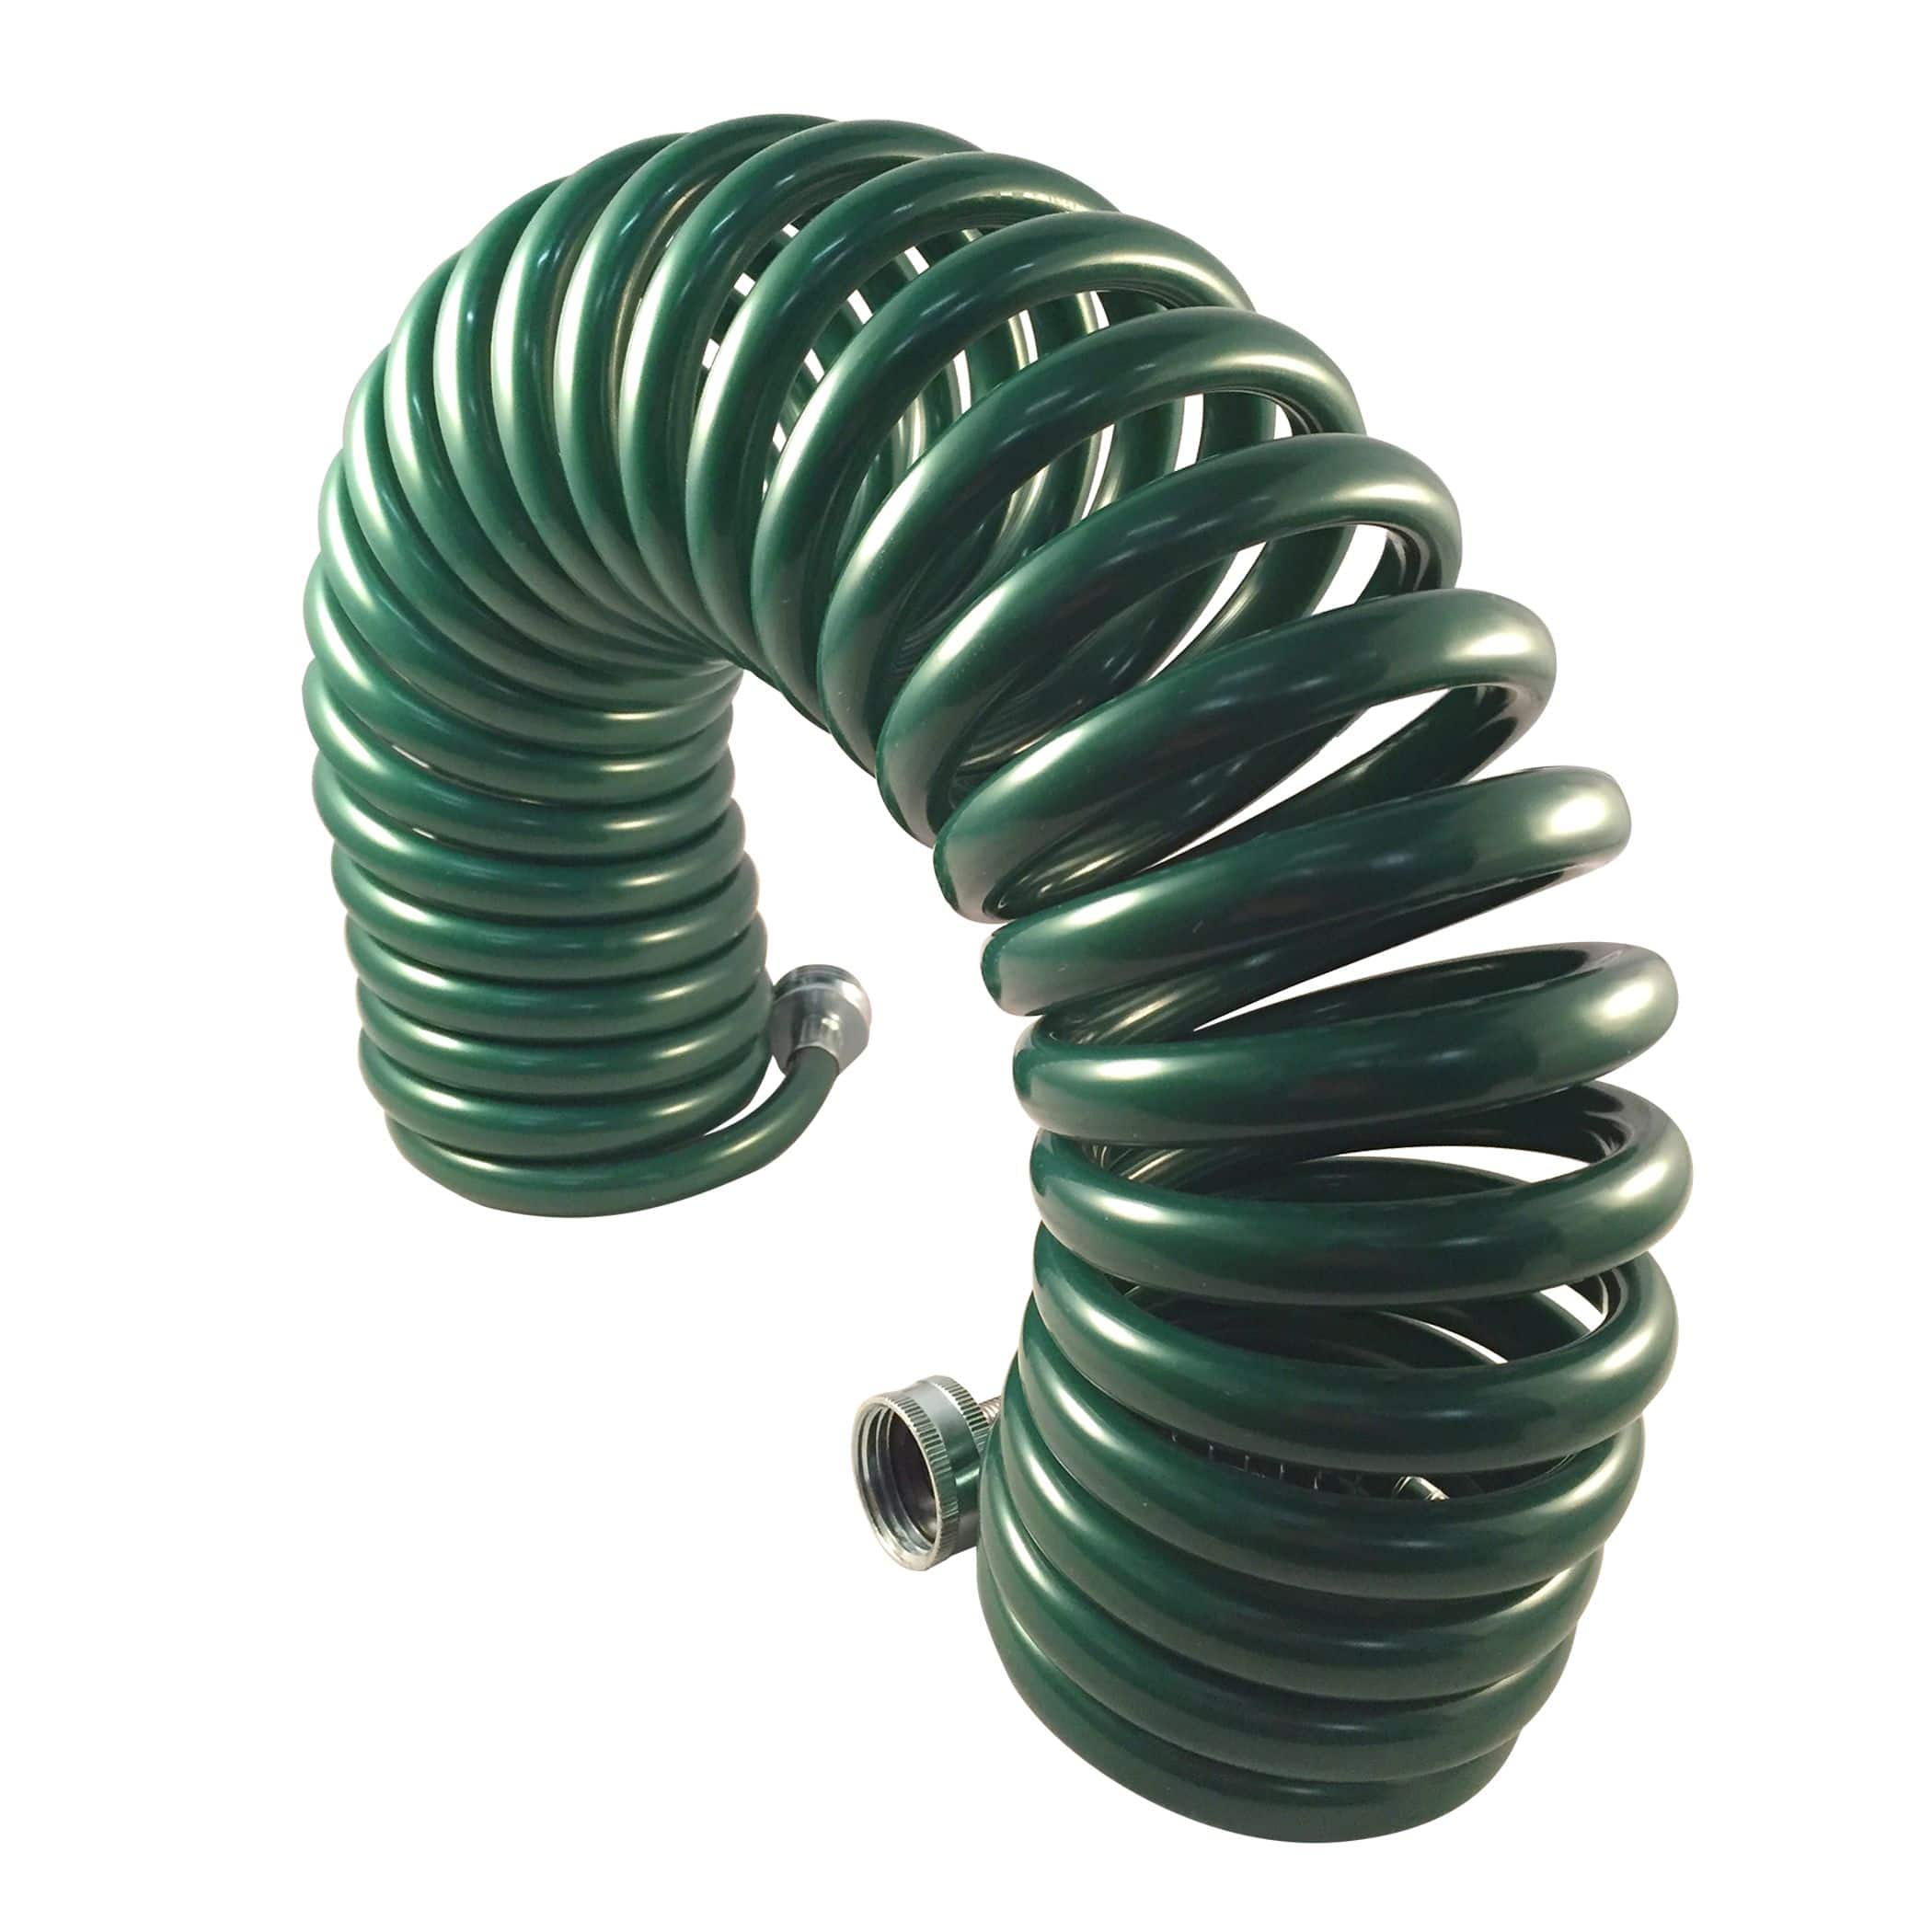 https://media-www.canadiantire.ca/product/seasonal-gardening/outdoor-tools/watering/0593317/certified-25-3-8-coiled-hose-748b0d25-4bd8-419c-bad1-ad3e3e81dc4c-jpgrendition.jpg